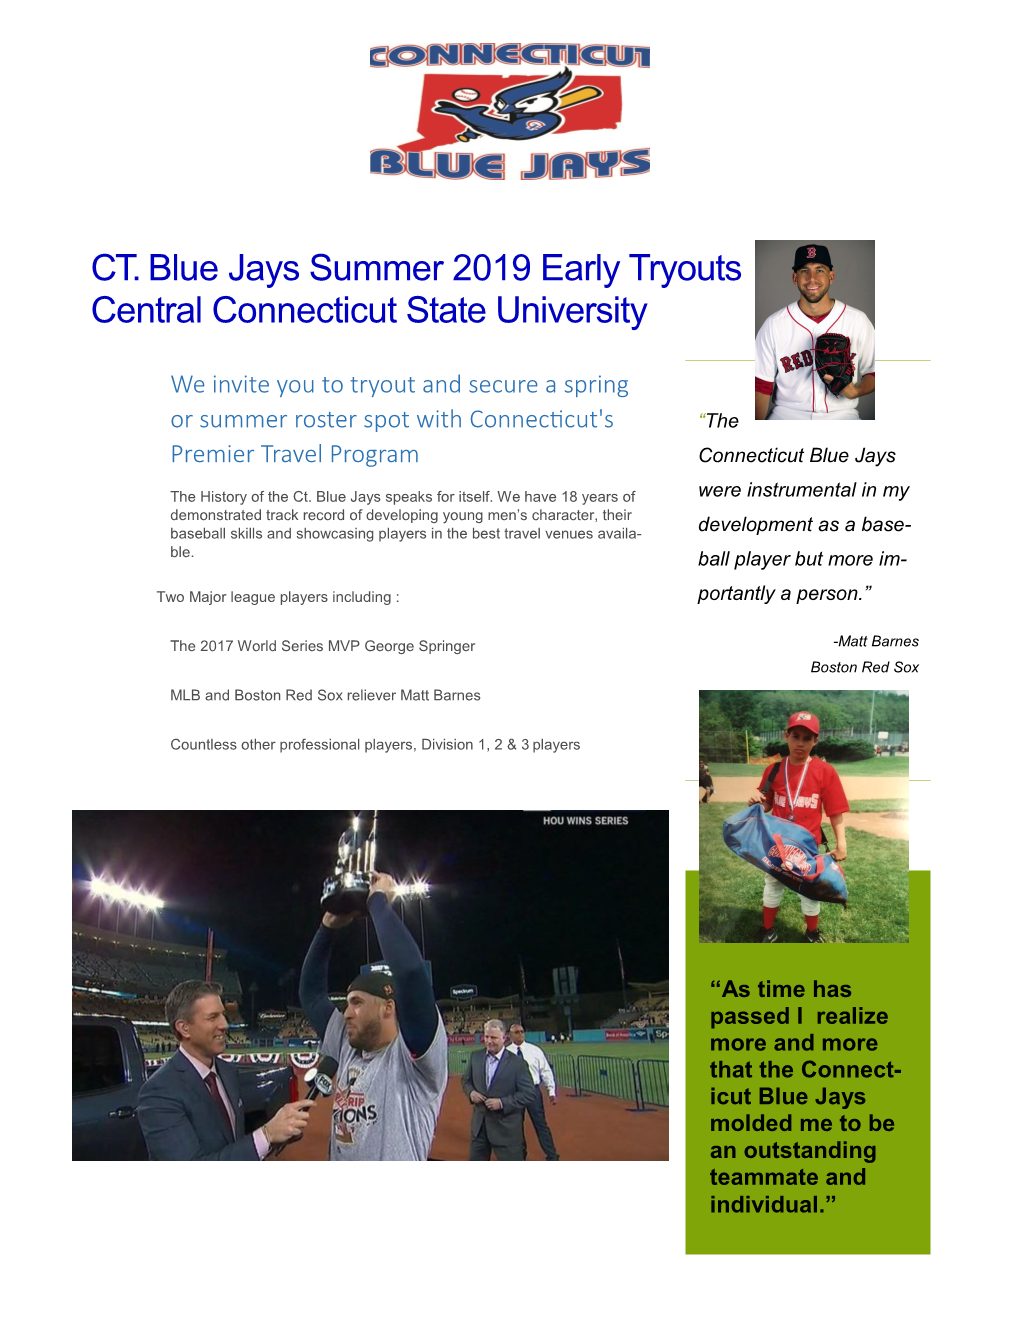 CT. Blue Jays Summer 2019 Early Tryouts Central Connecticut State University